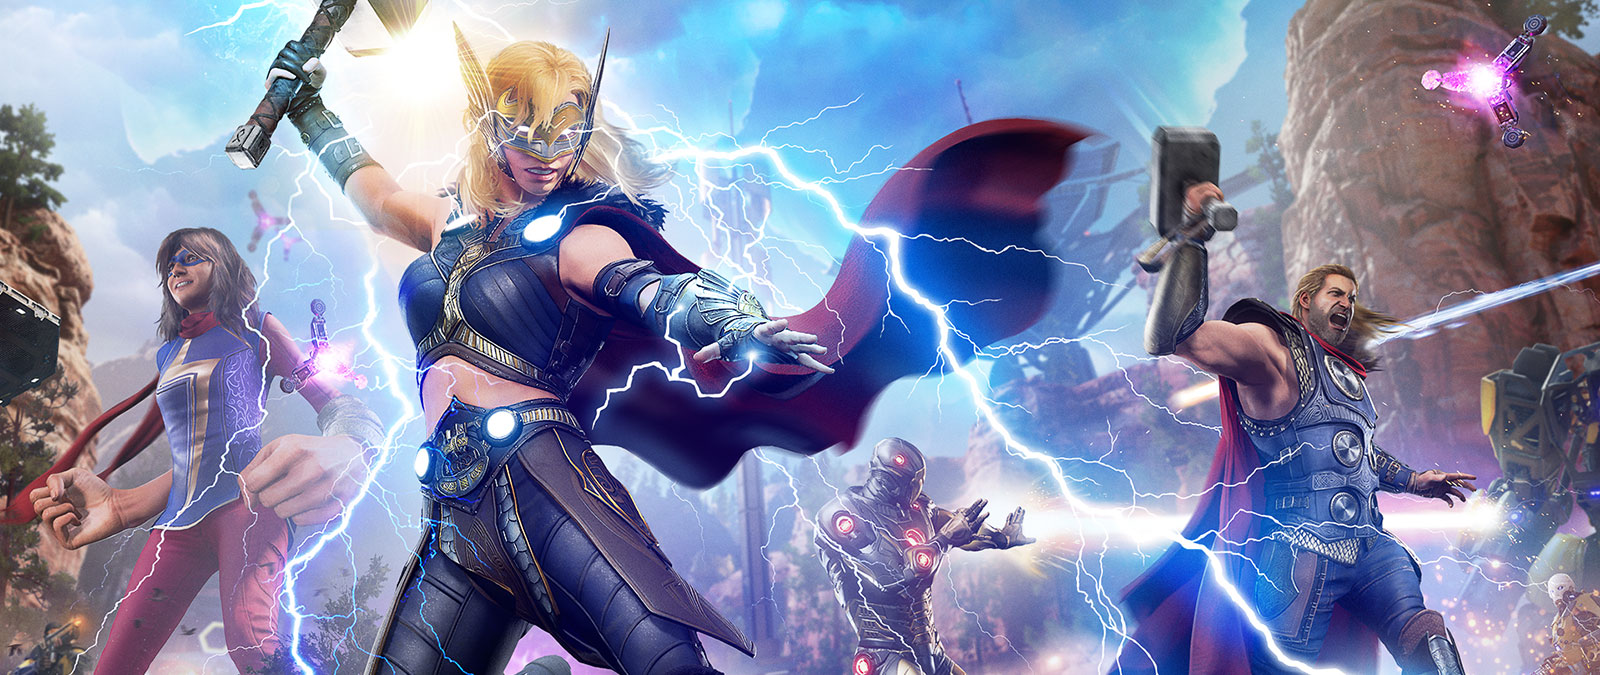 Jane Foster, the Mighty Thor, looses a bolt of lightning on a mechanical foe.